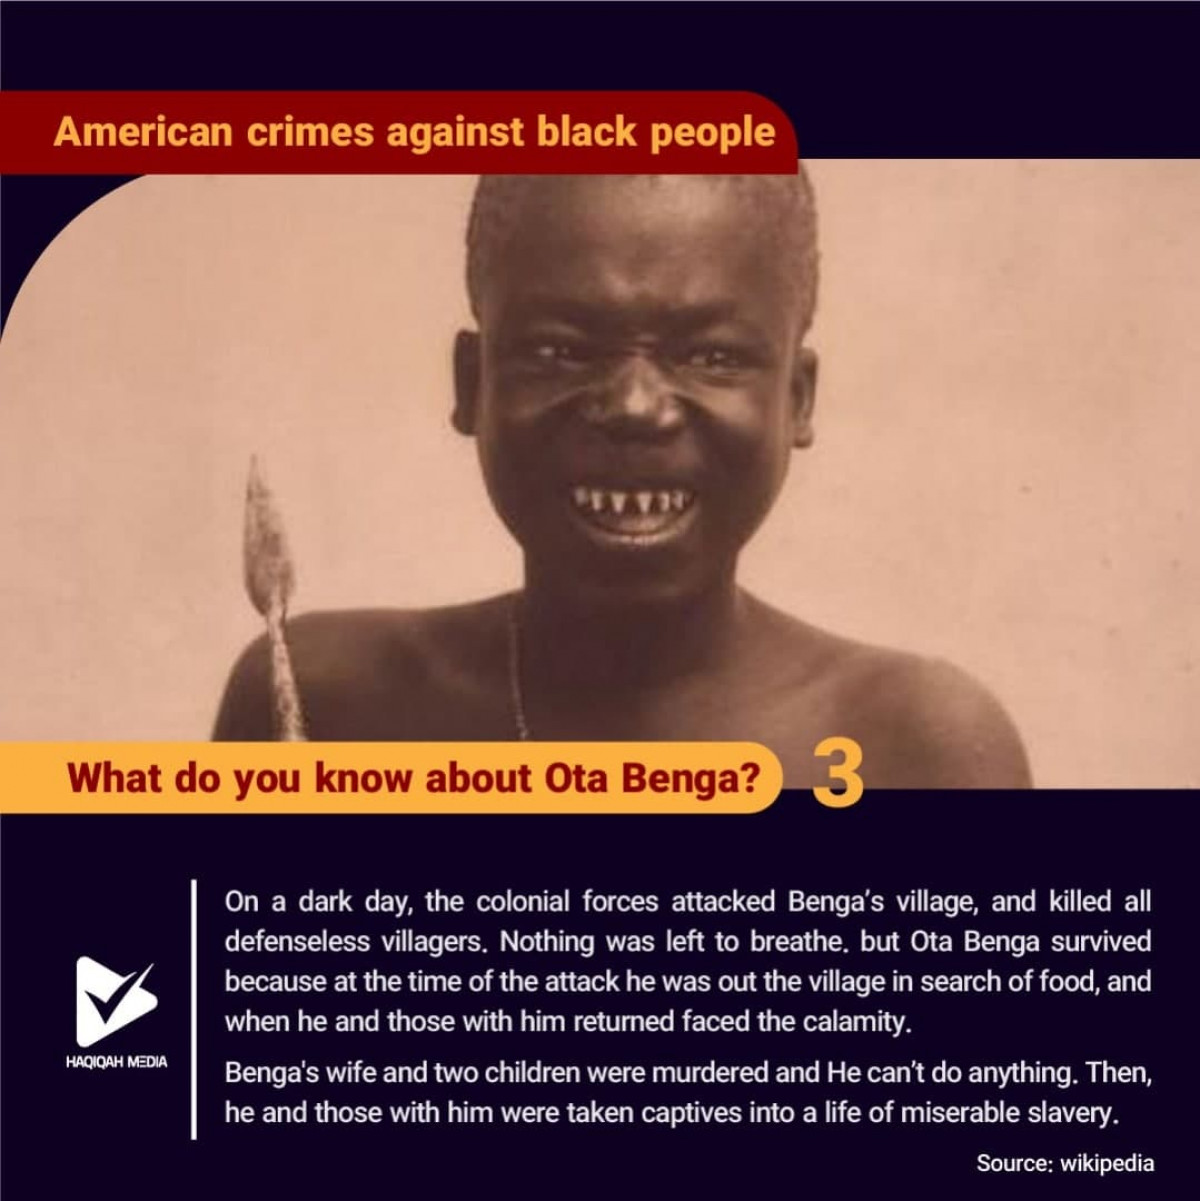 What do you know about Ota Benga? 3